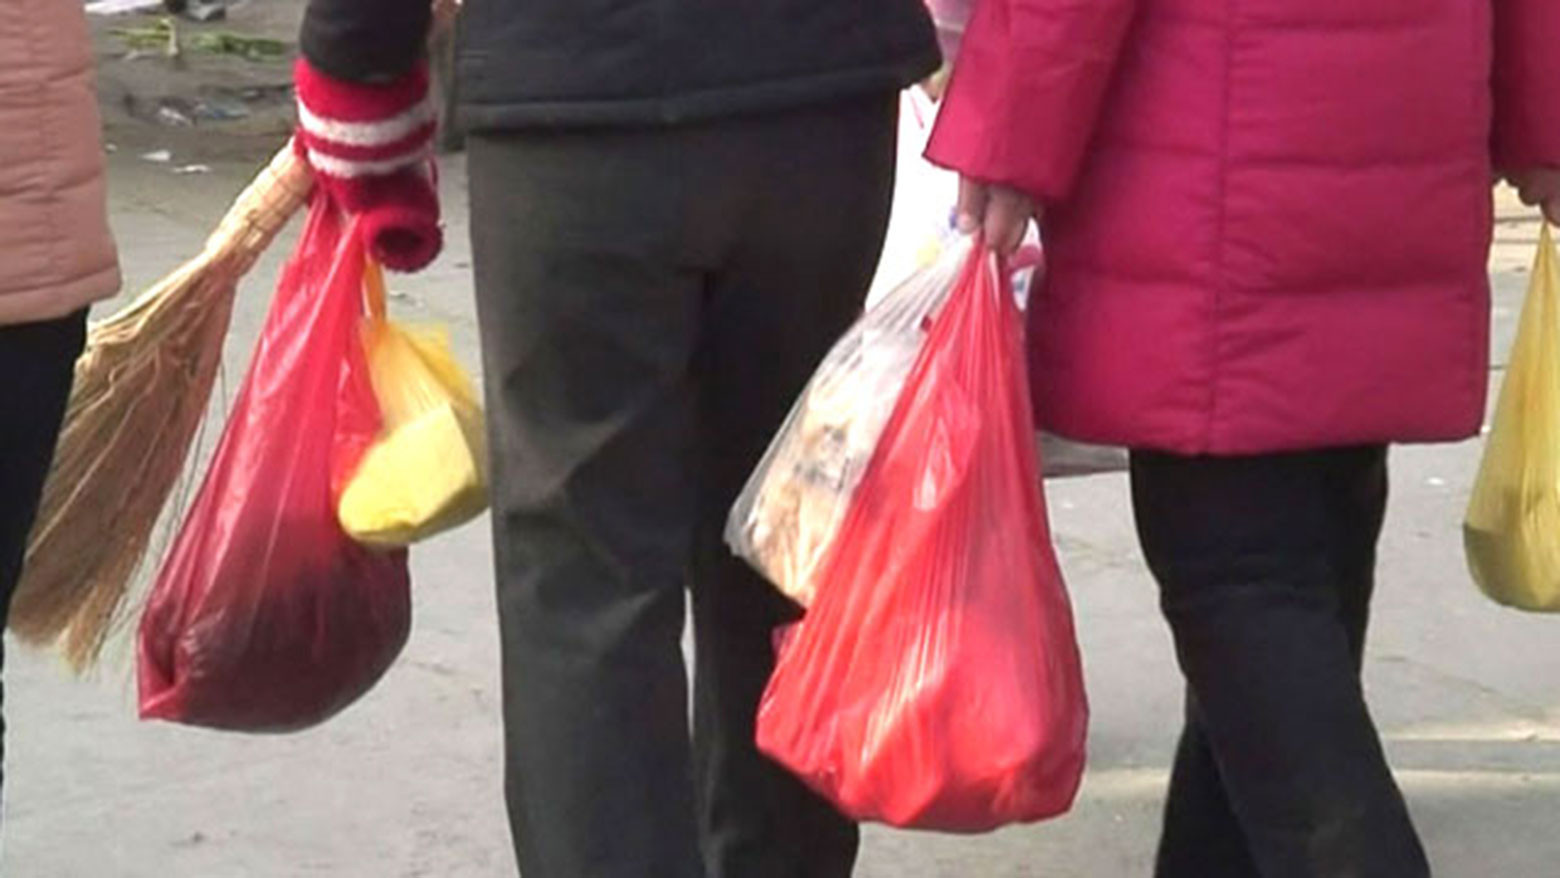 China’s plastic waste problem comes in new shapes and sizes amid coronavirus pandemic